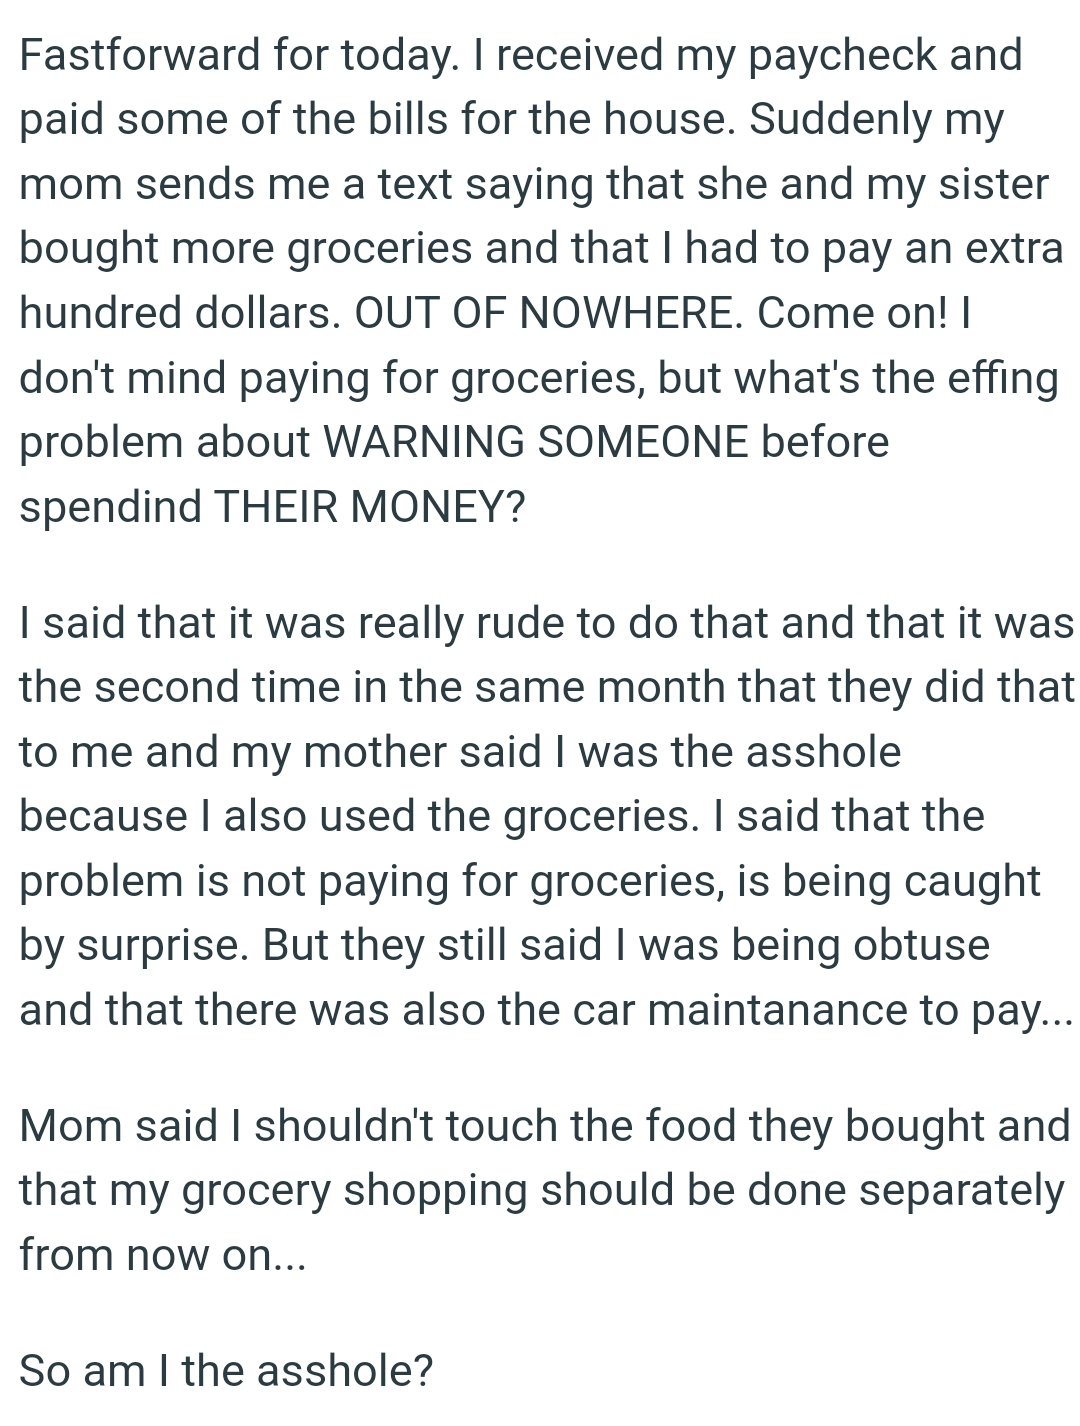 The problem is not paying for groceries, but being caught by surprise